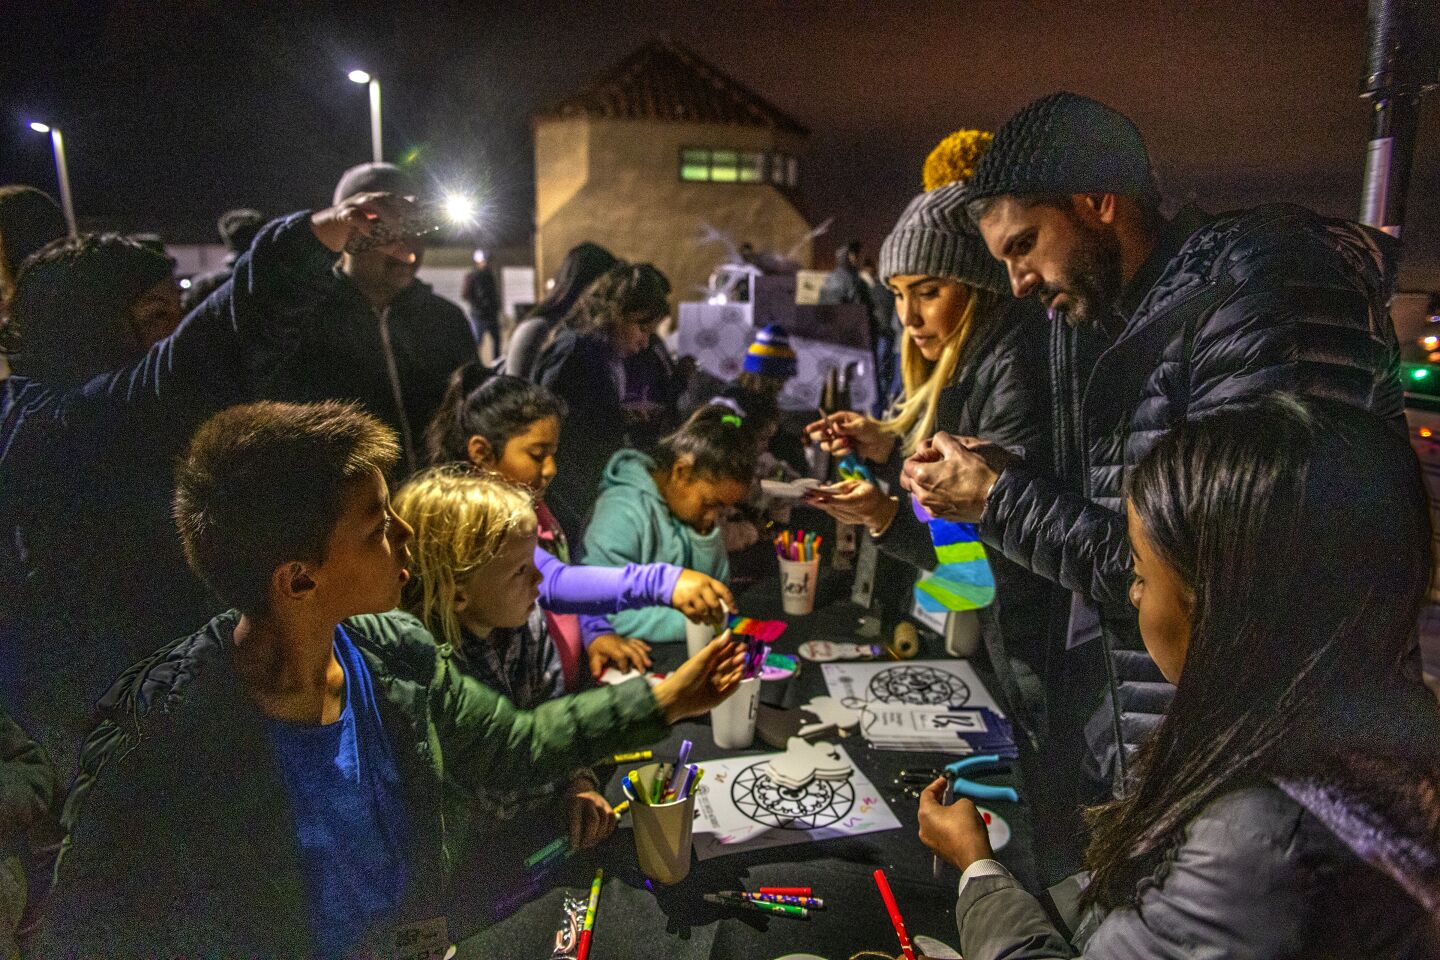 Lauren Bergmann and Kyle Landig craft Christmas ornaments for their young audience at the art project table during Sunday night's Shine Bright festivities in Costa Mesa.